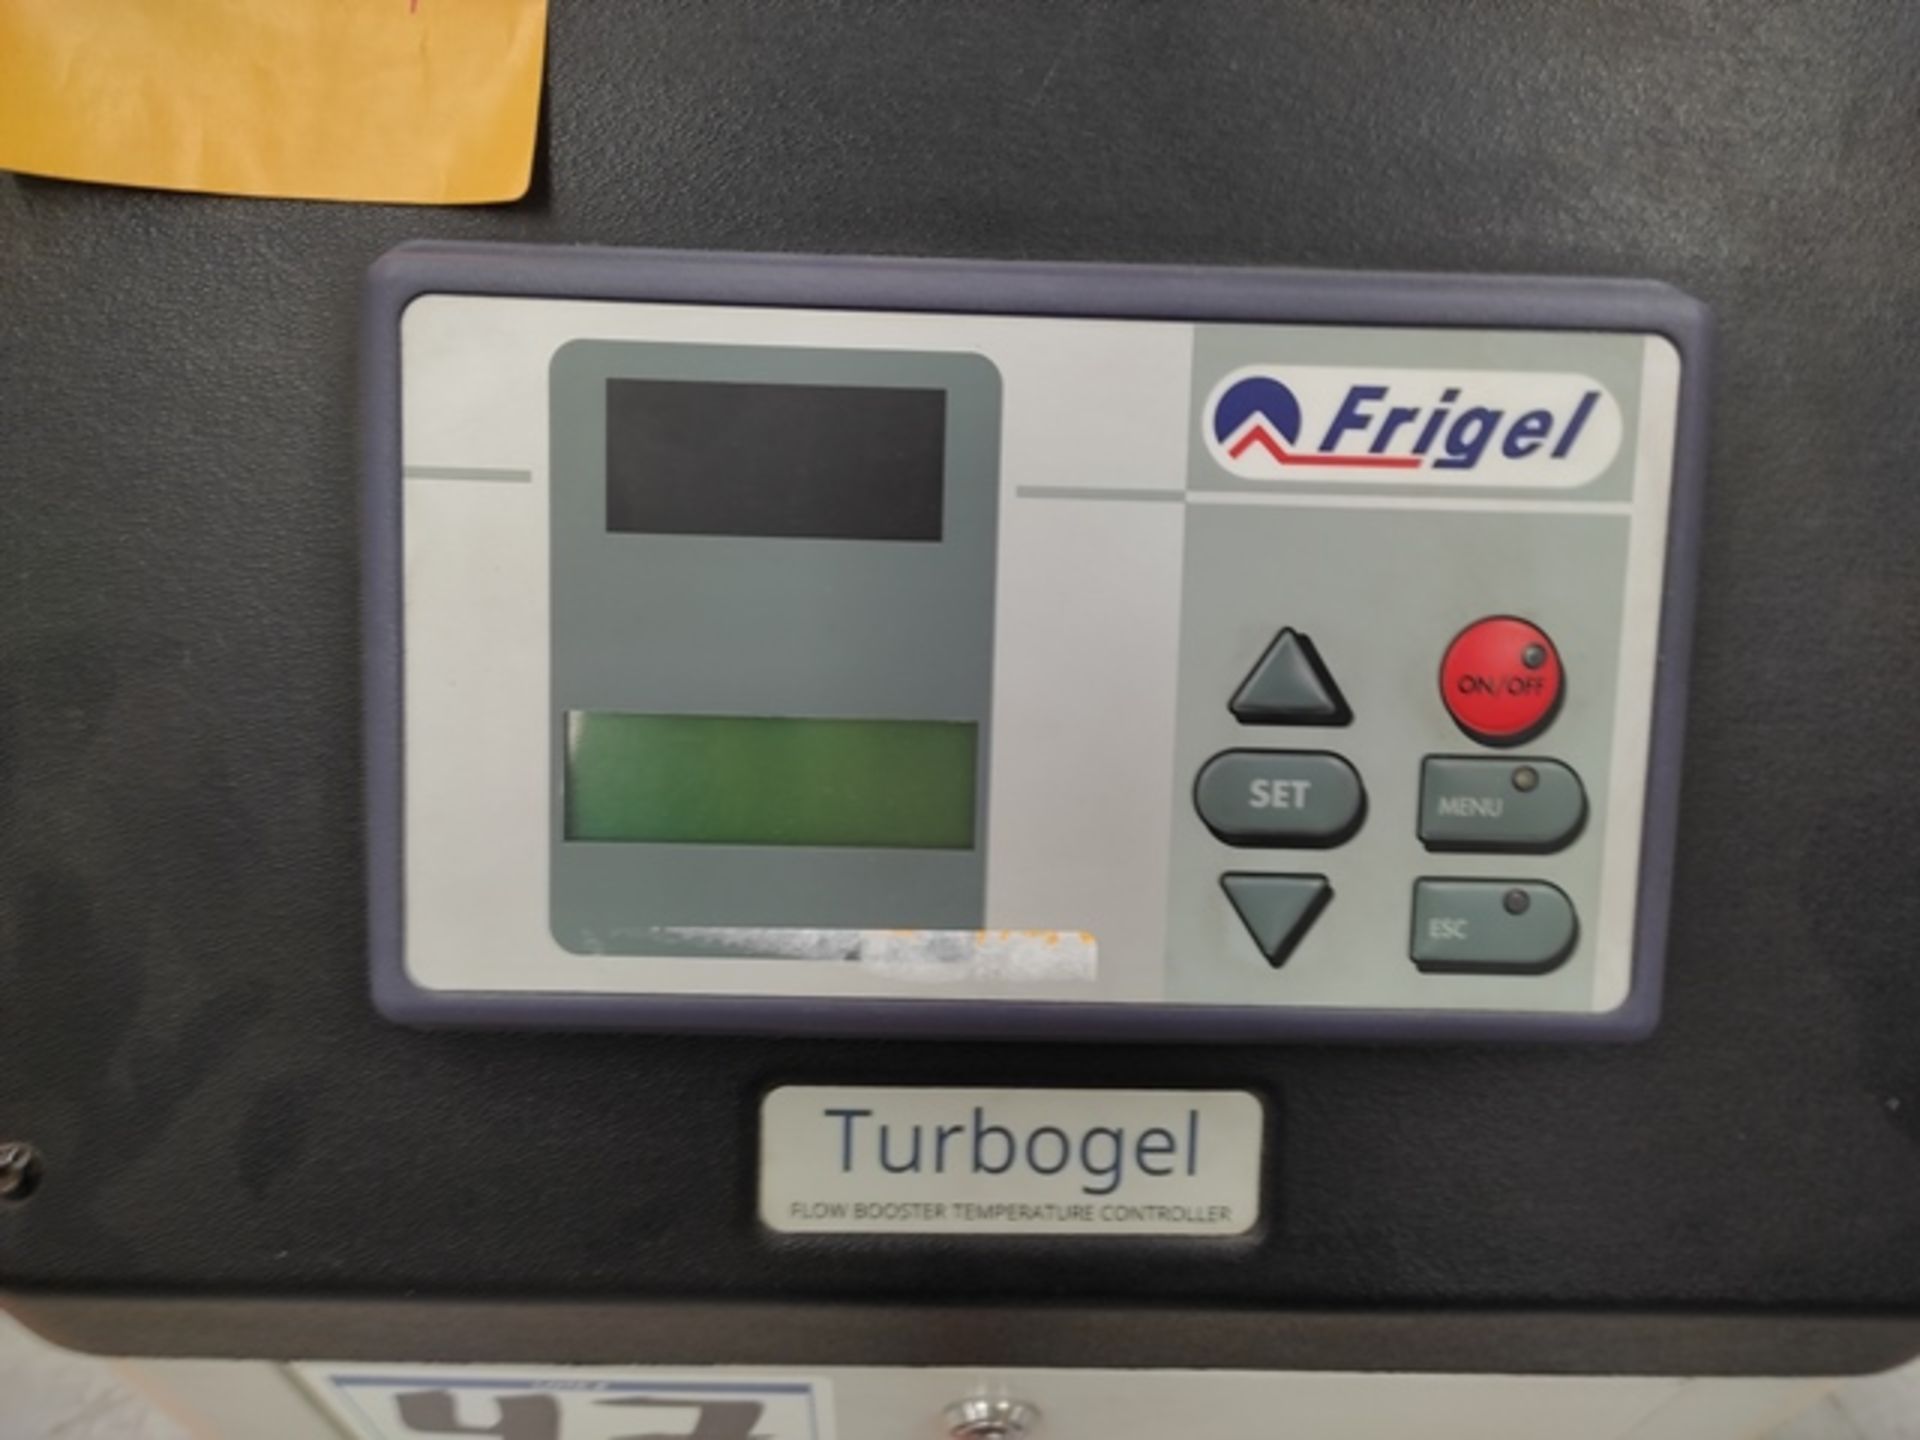 Lot of: (2) Frigel RBD130/24 SP 24 KW Flow Booster Temperature Controllers, Mfg. Year: 2017 - Image 4 of 10